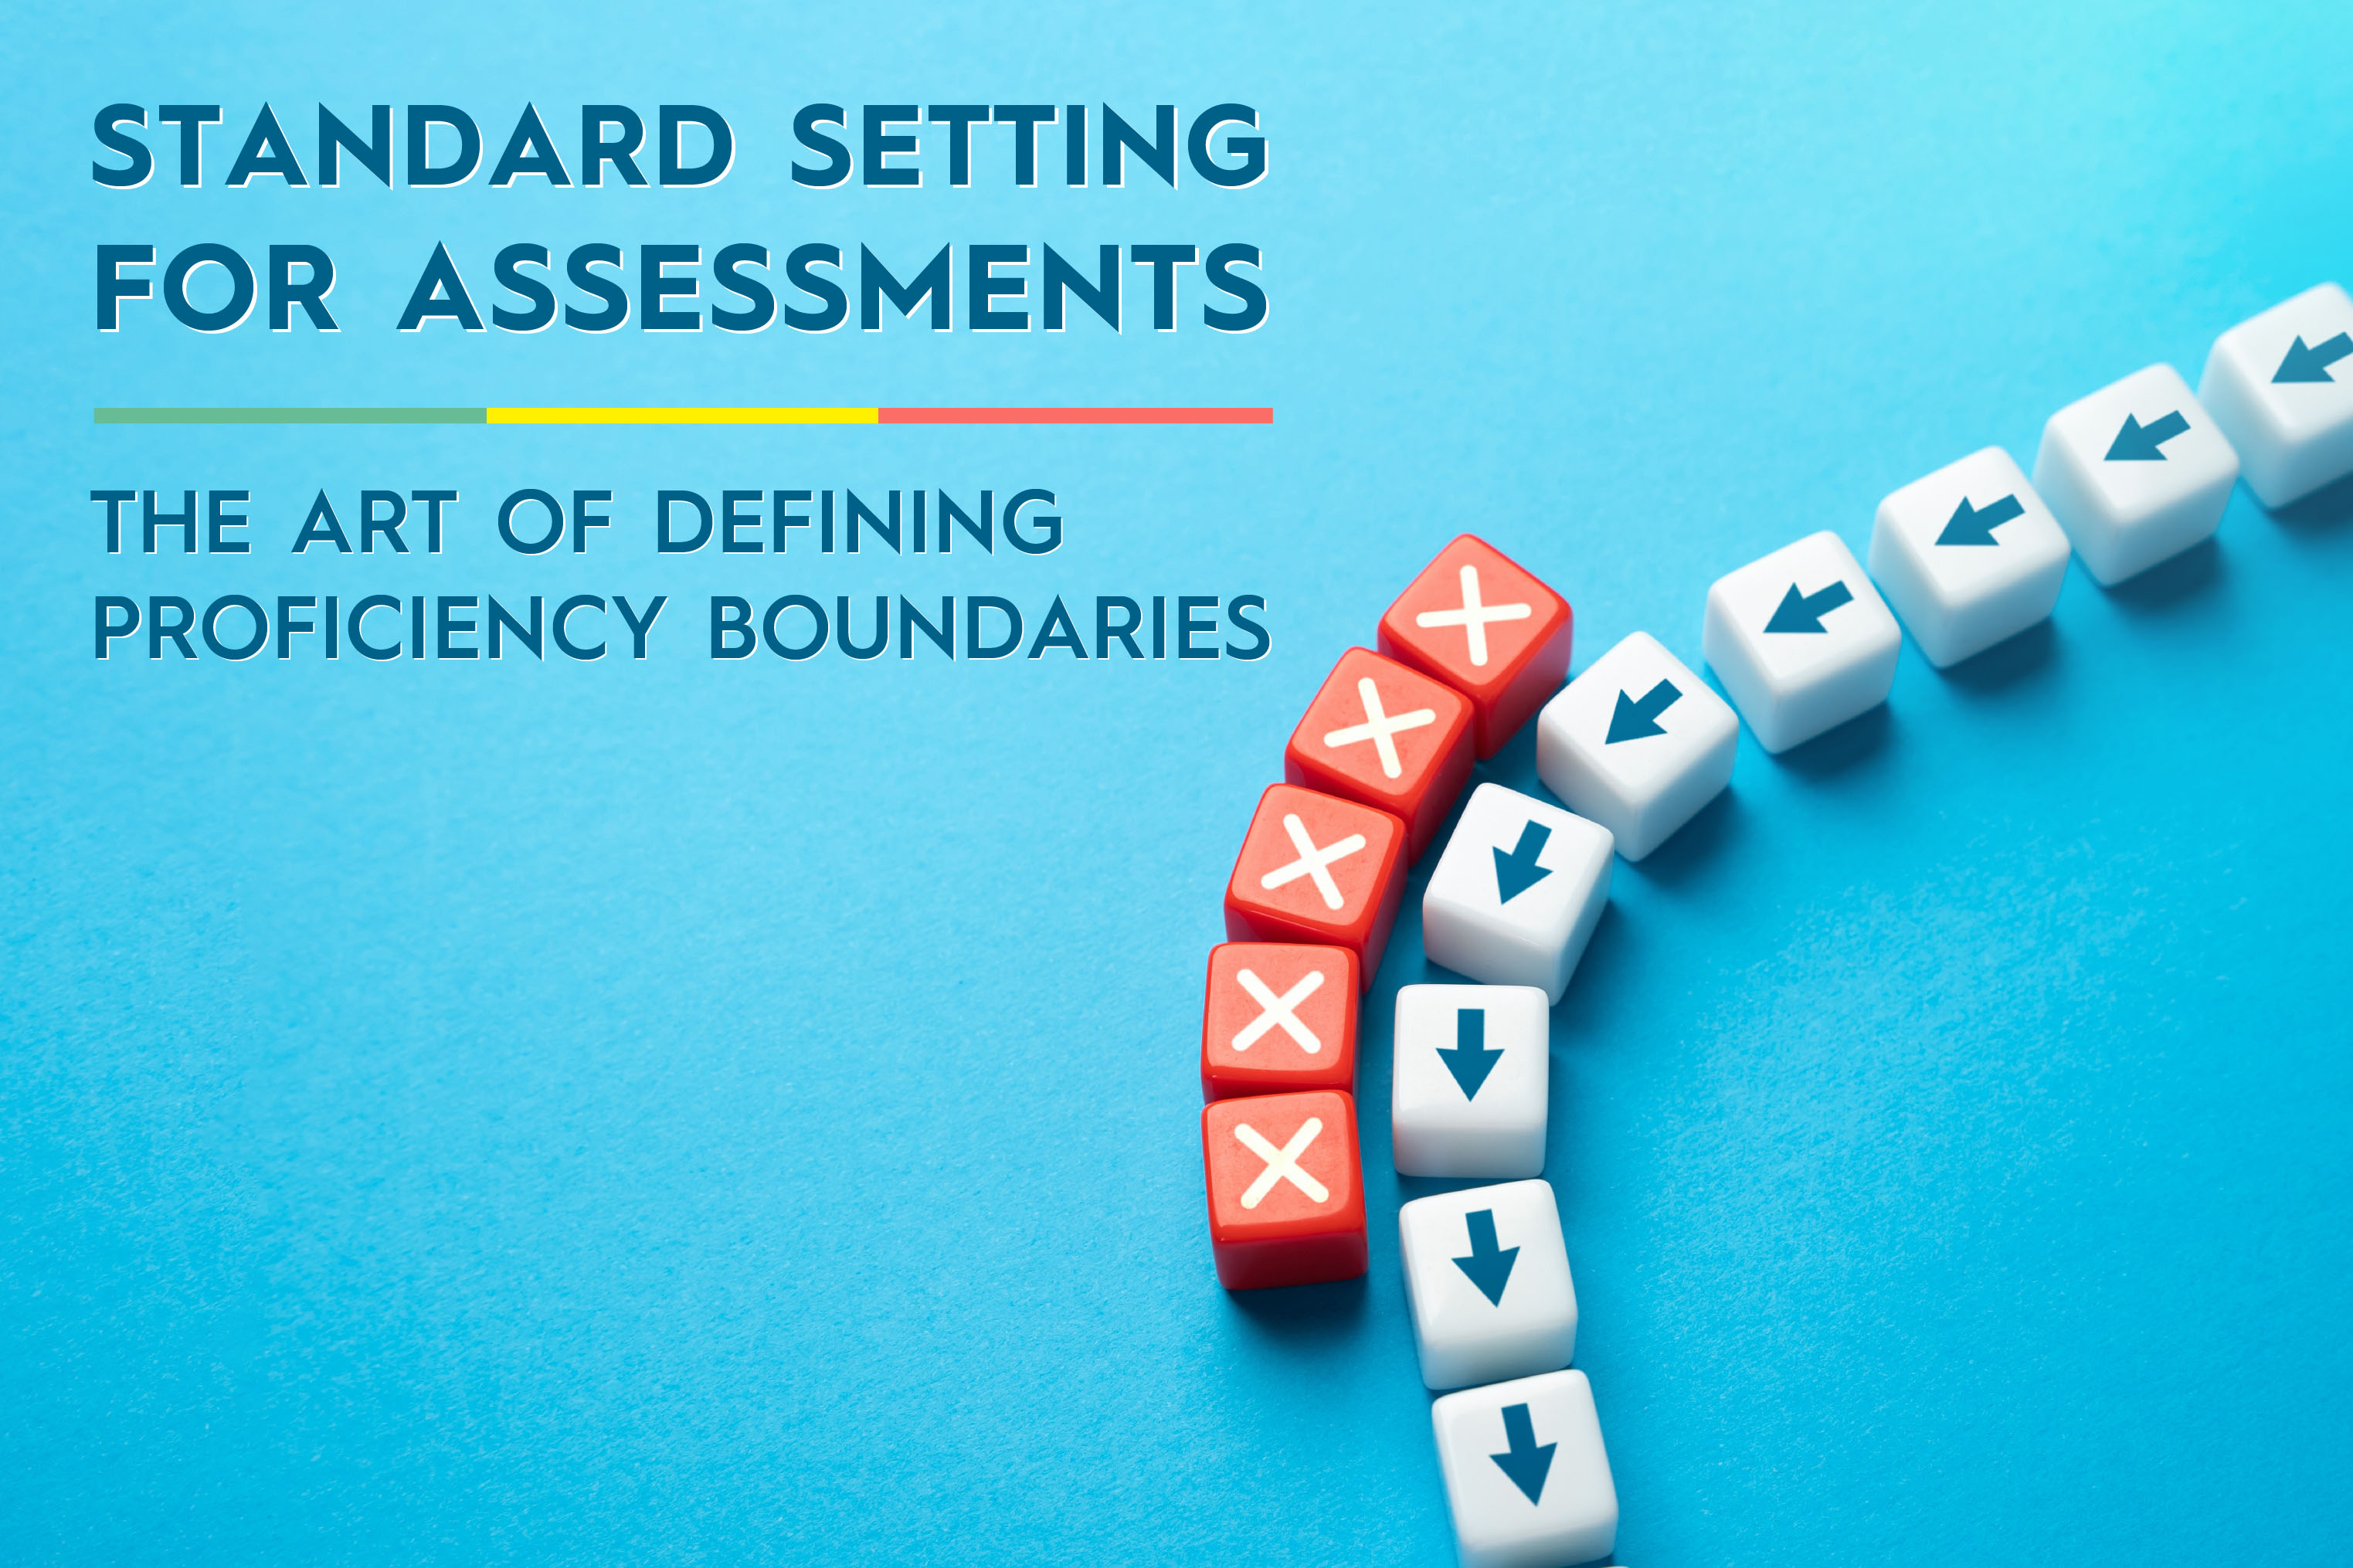 Standard Setting for Assessments: The Art of Defining Proficiency Boundaries